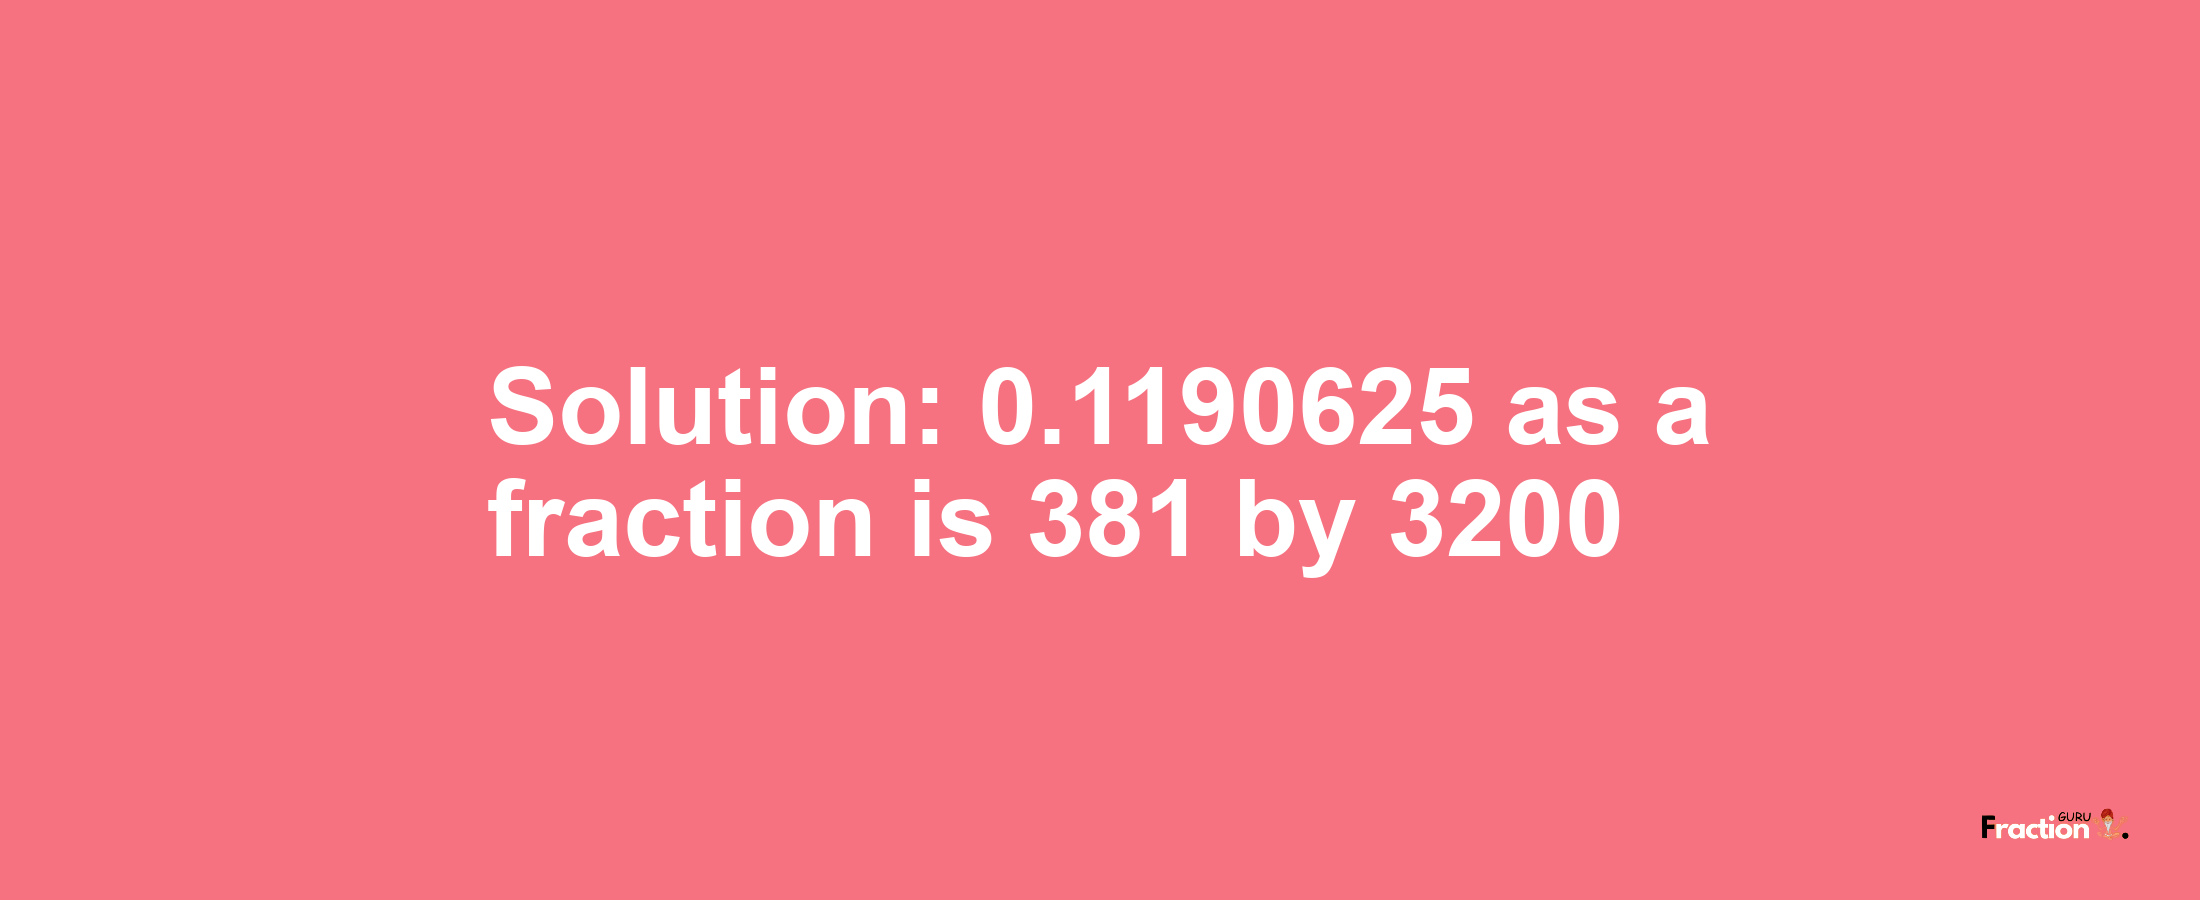 Solution:0.1190625 as a fraction is 381/3200